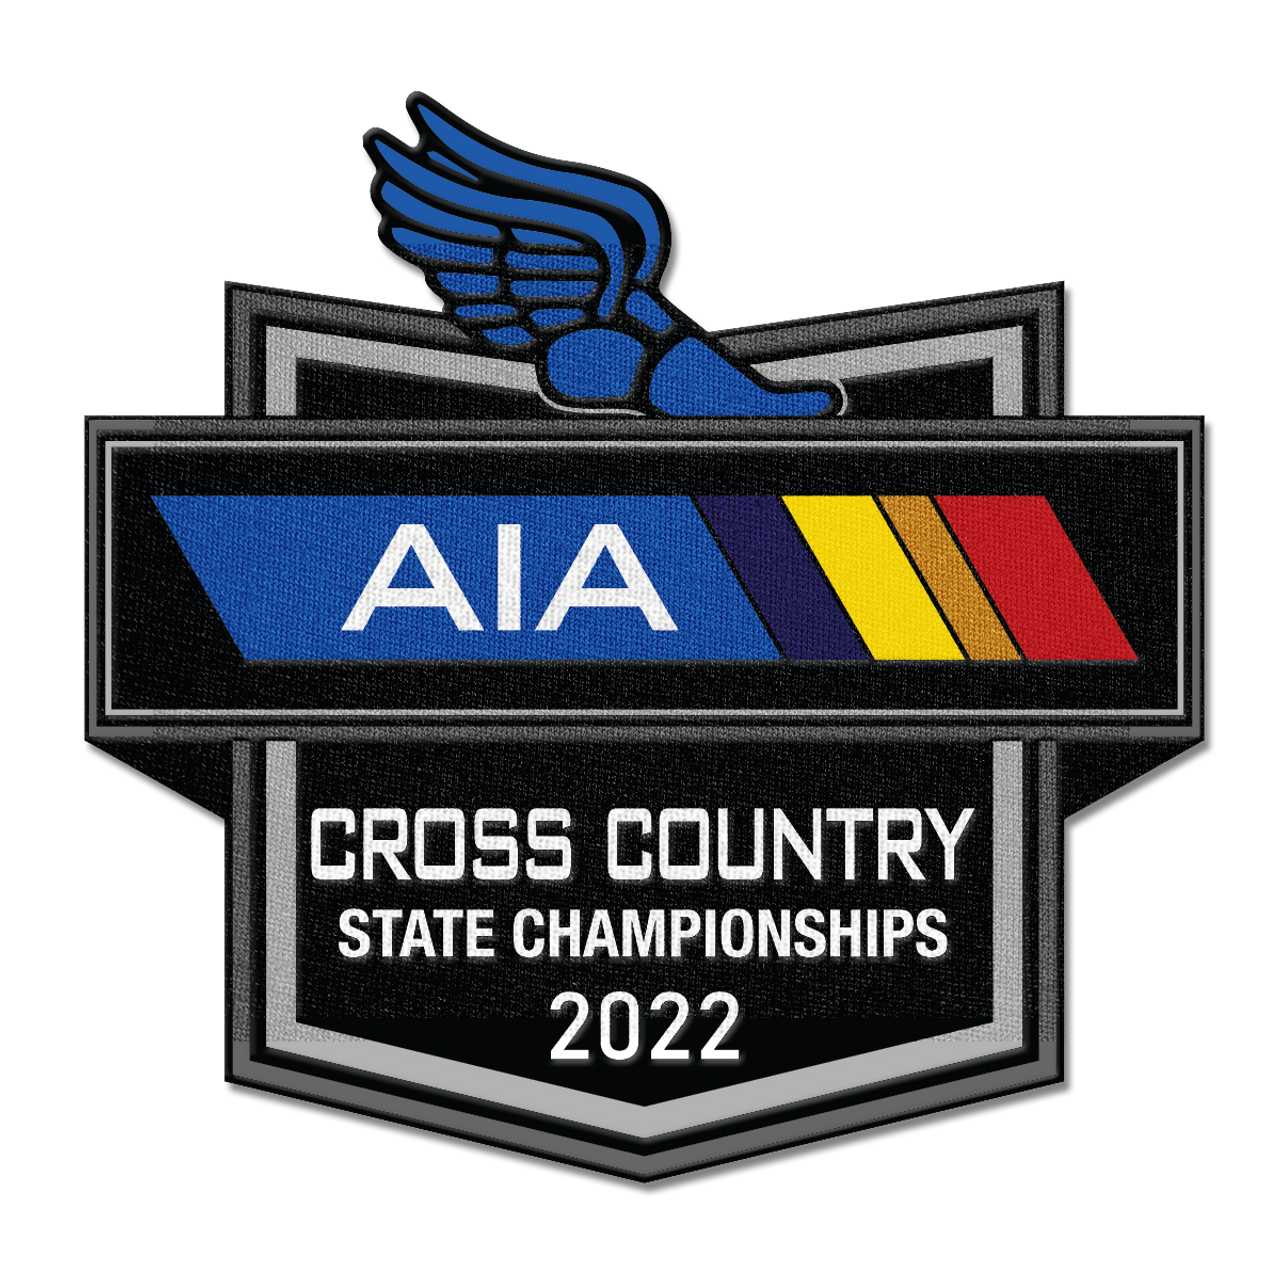 2022 AIA Cross Country State Championships Patch